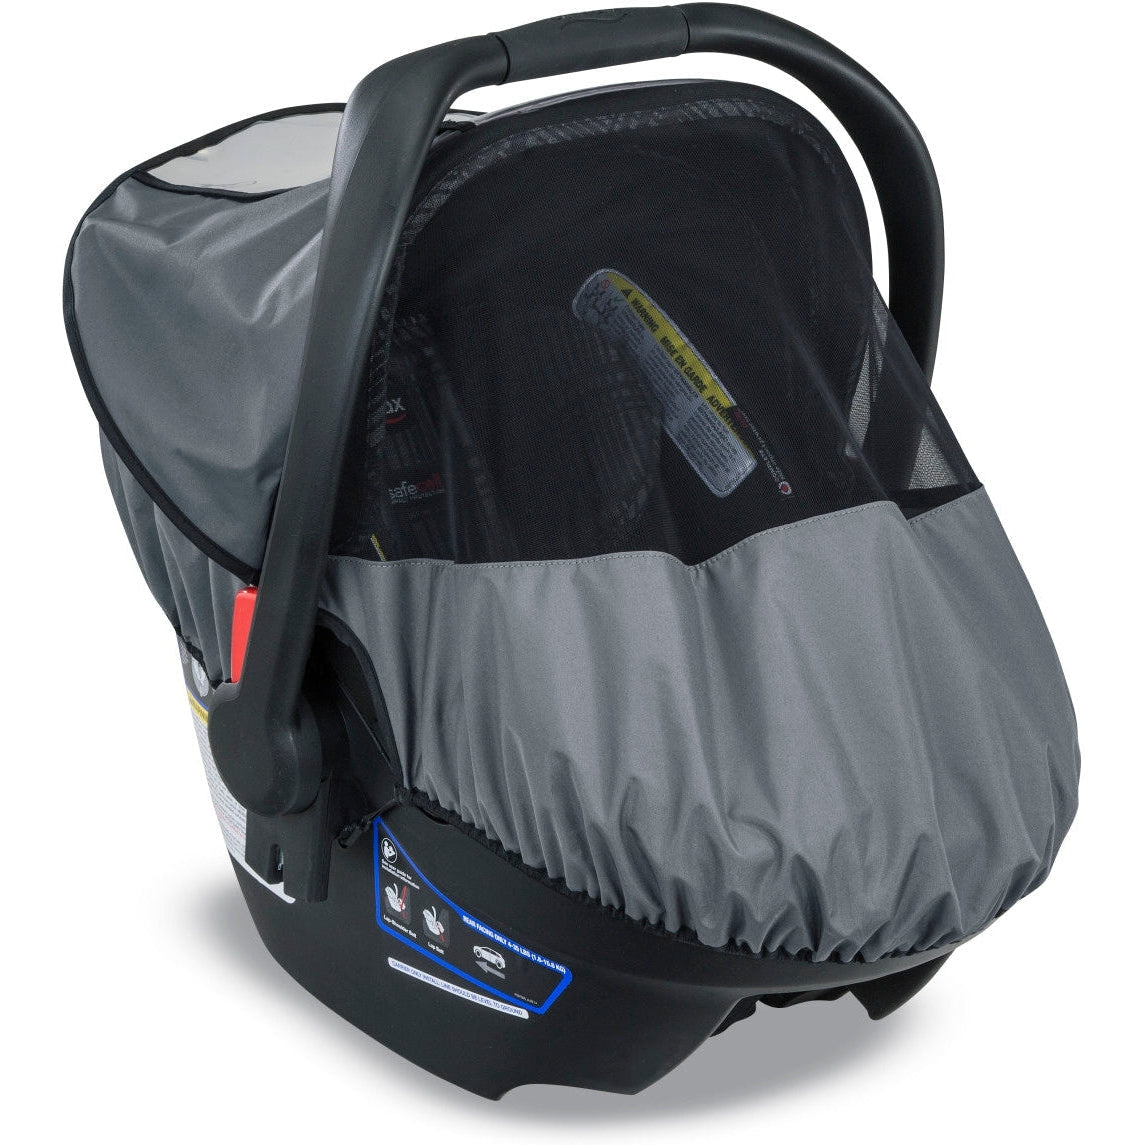 Britax B-Covered All-Weather Infant Car Seat Cover with UP 50+